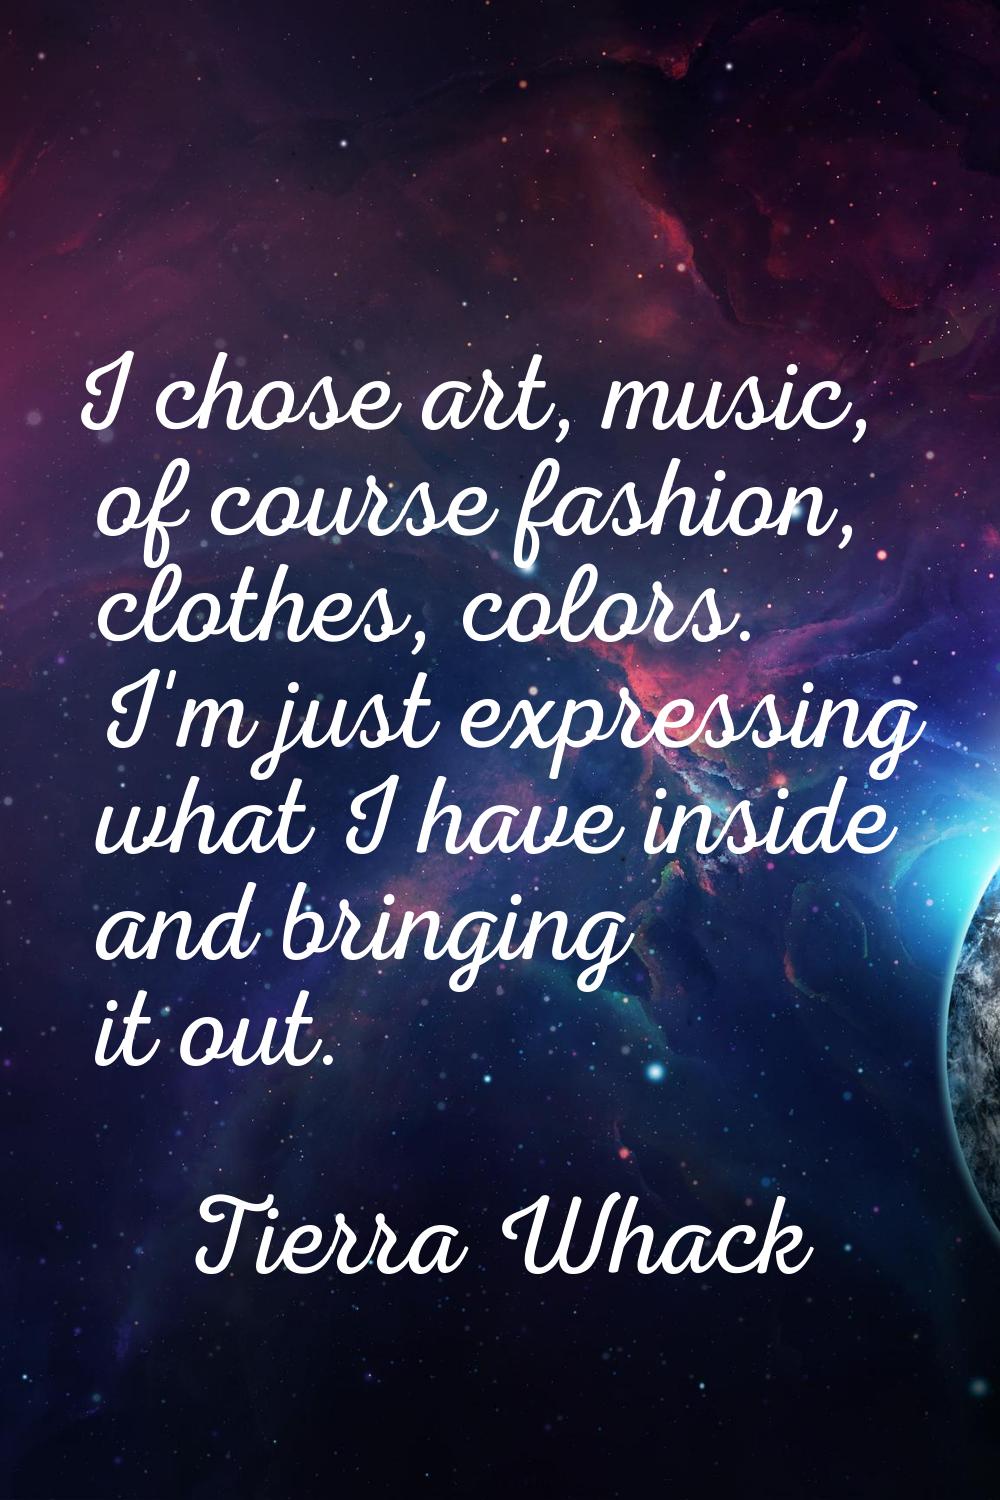 I chose art, music, of course fashion, clothes, colors. I'm just expressing what I have inside and 